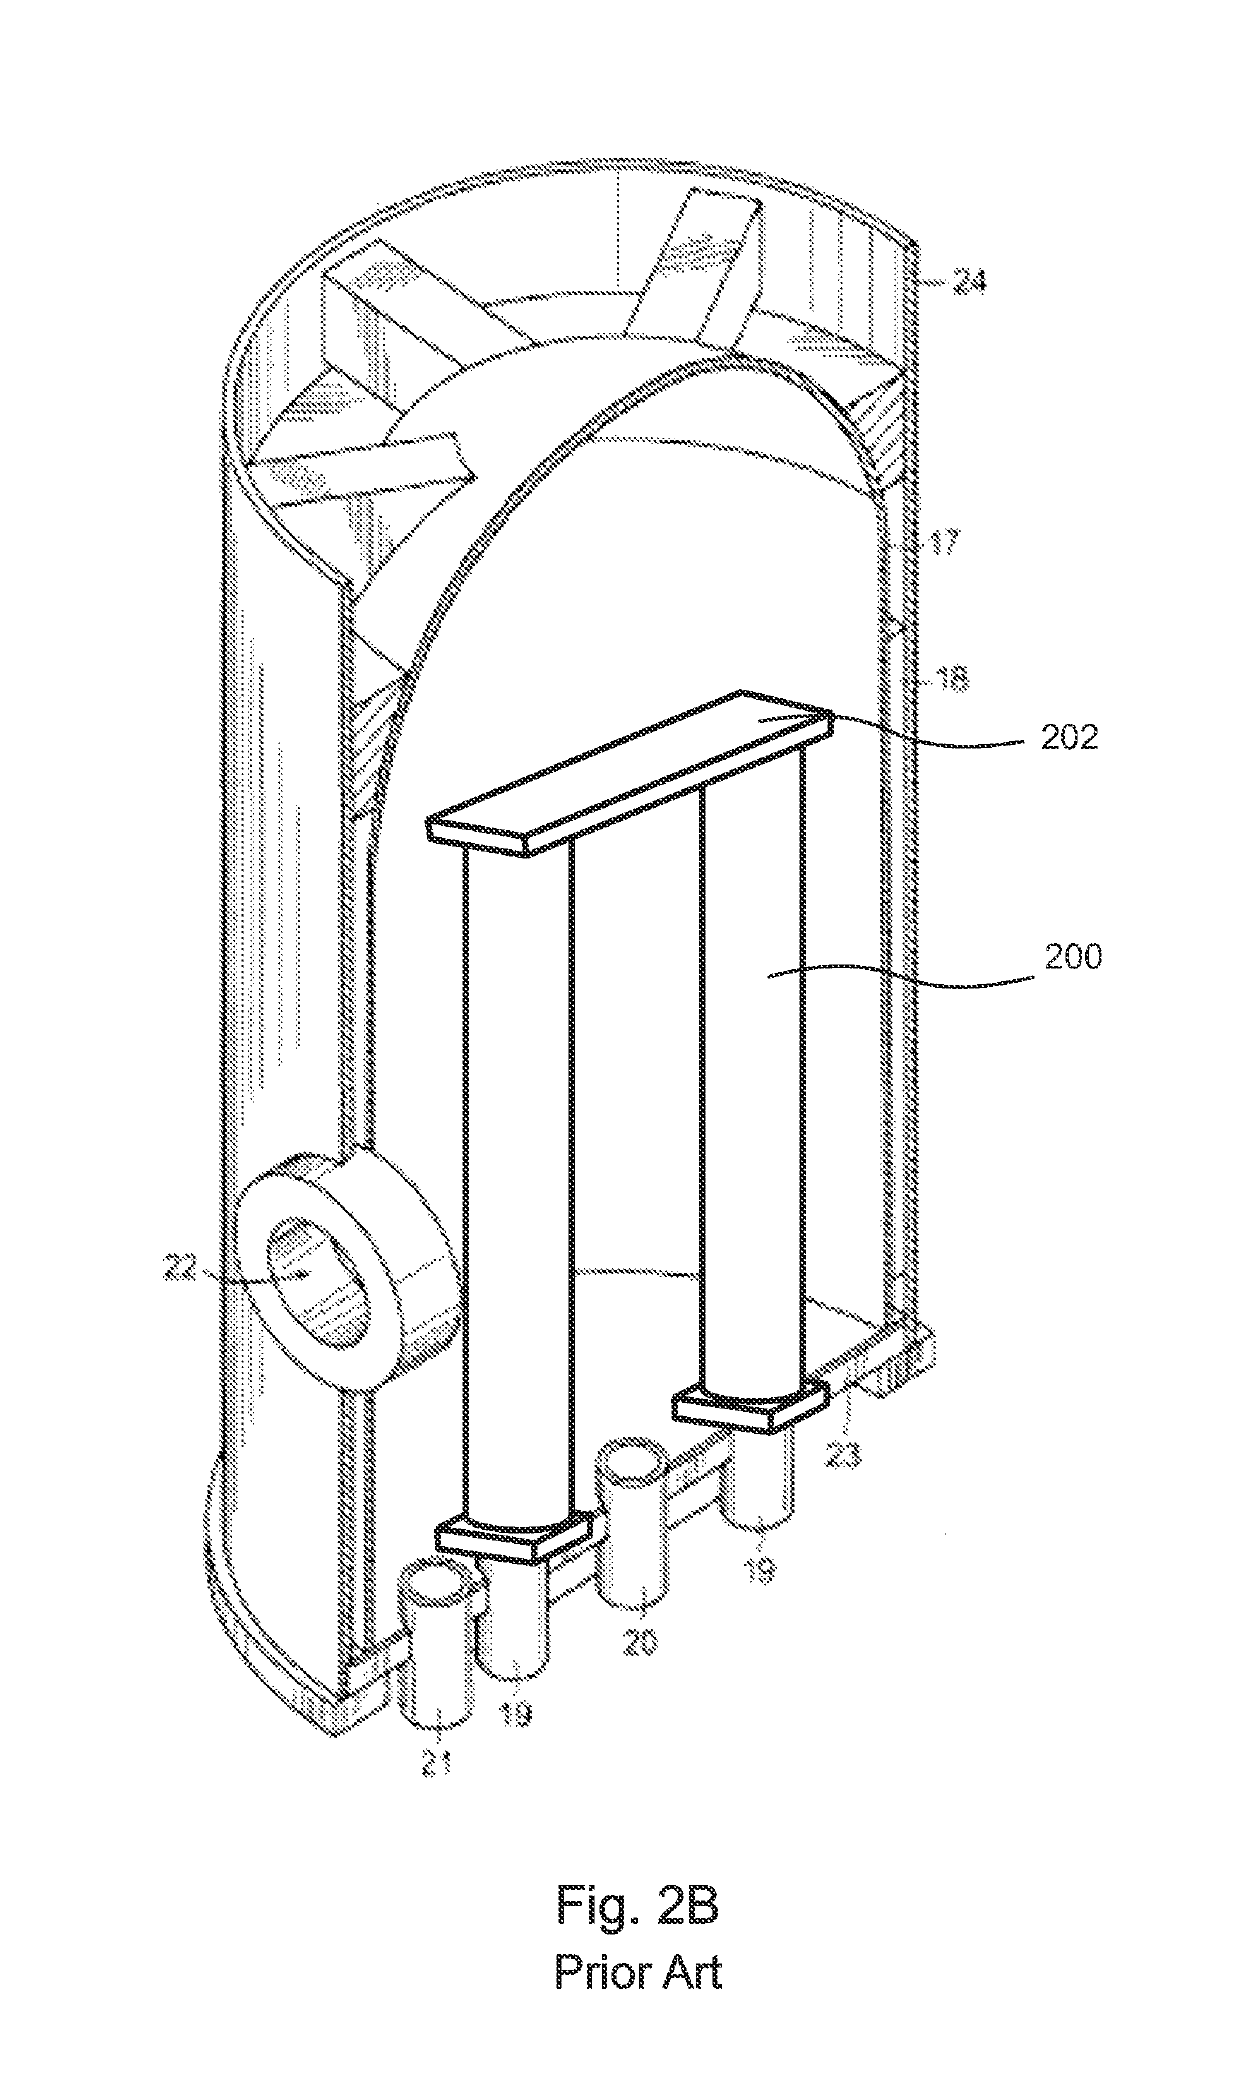 Reactor filament assembly with enhanced misalignment tolerance